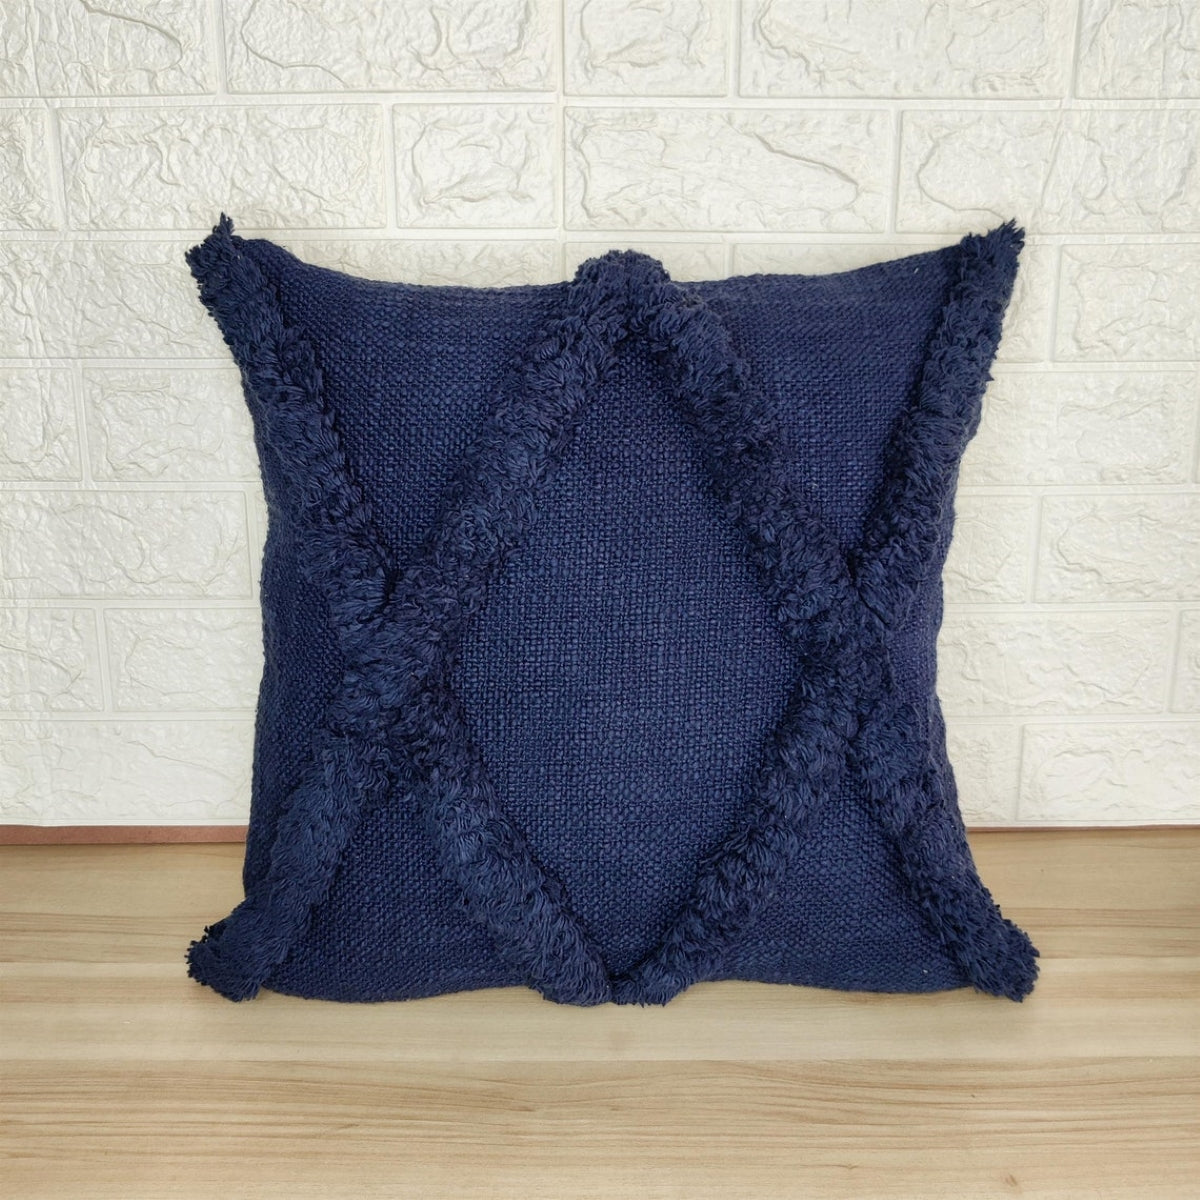 Navy Blue Handtufted Cotton Cushion Cover